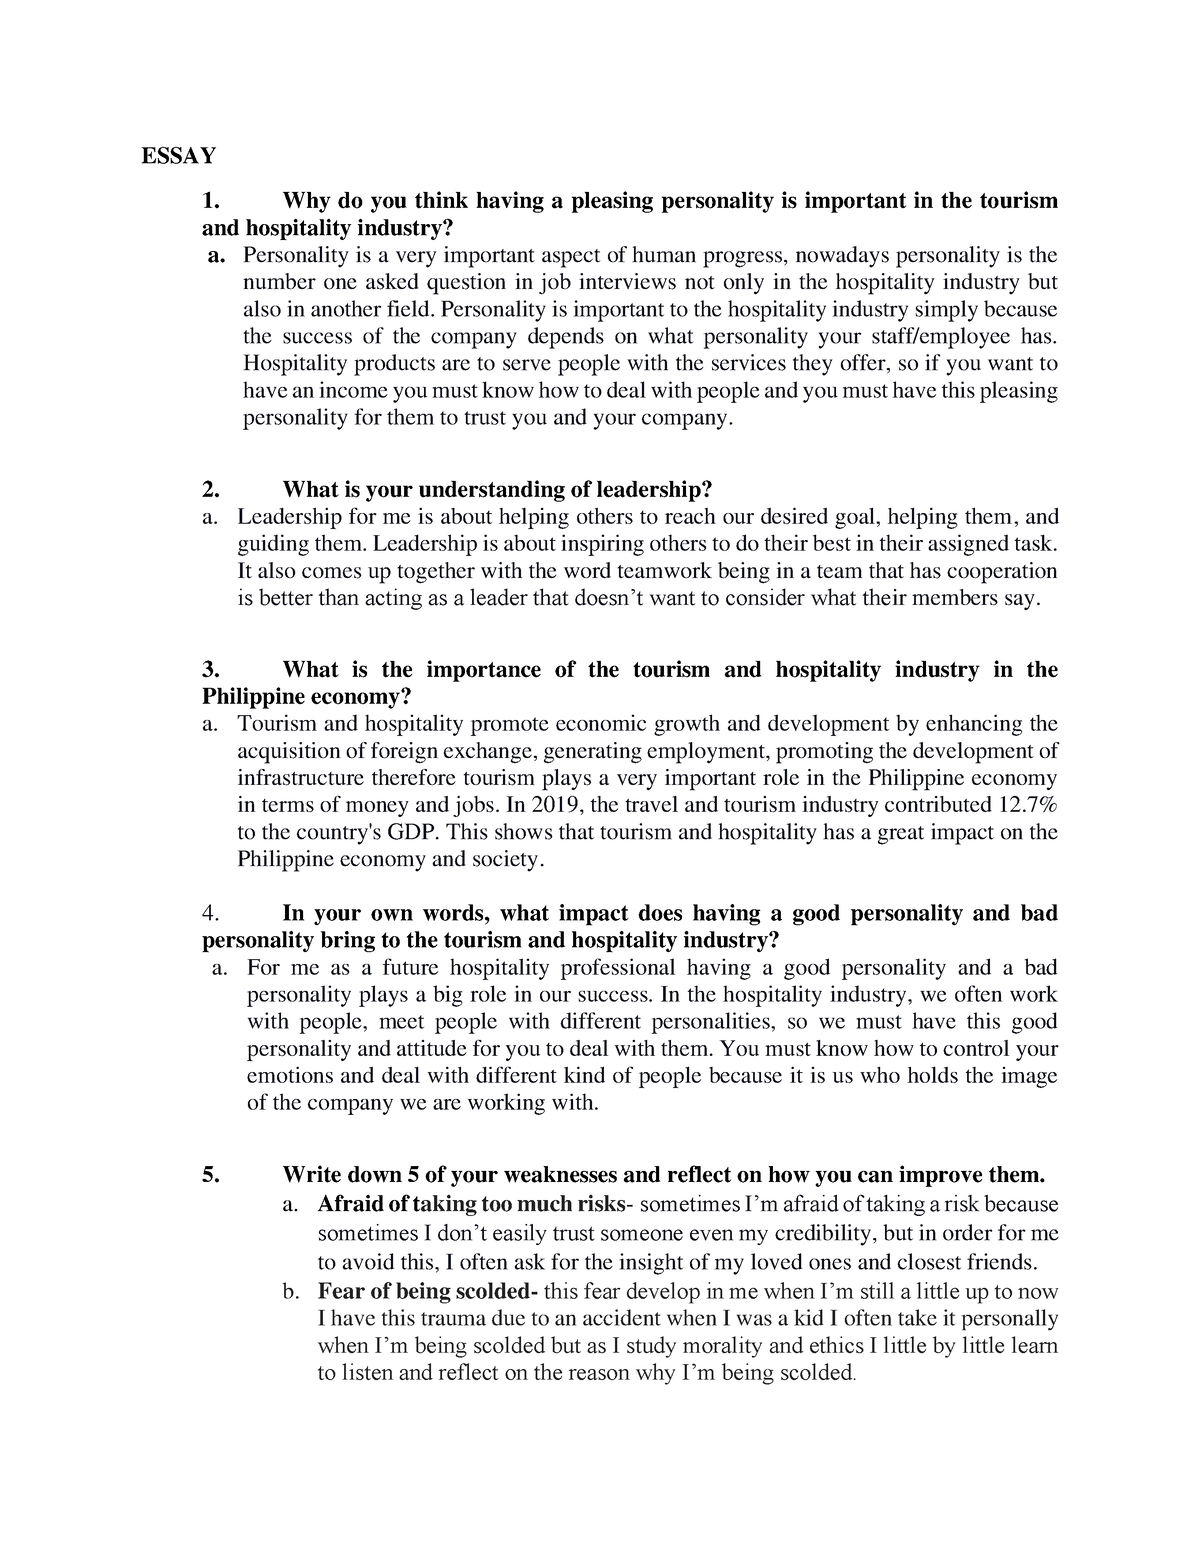 professional development and applied ethics essay